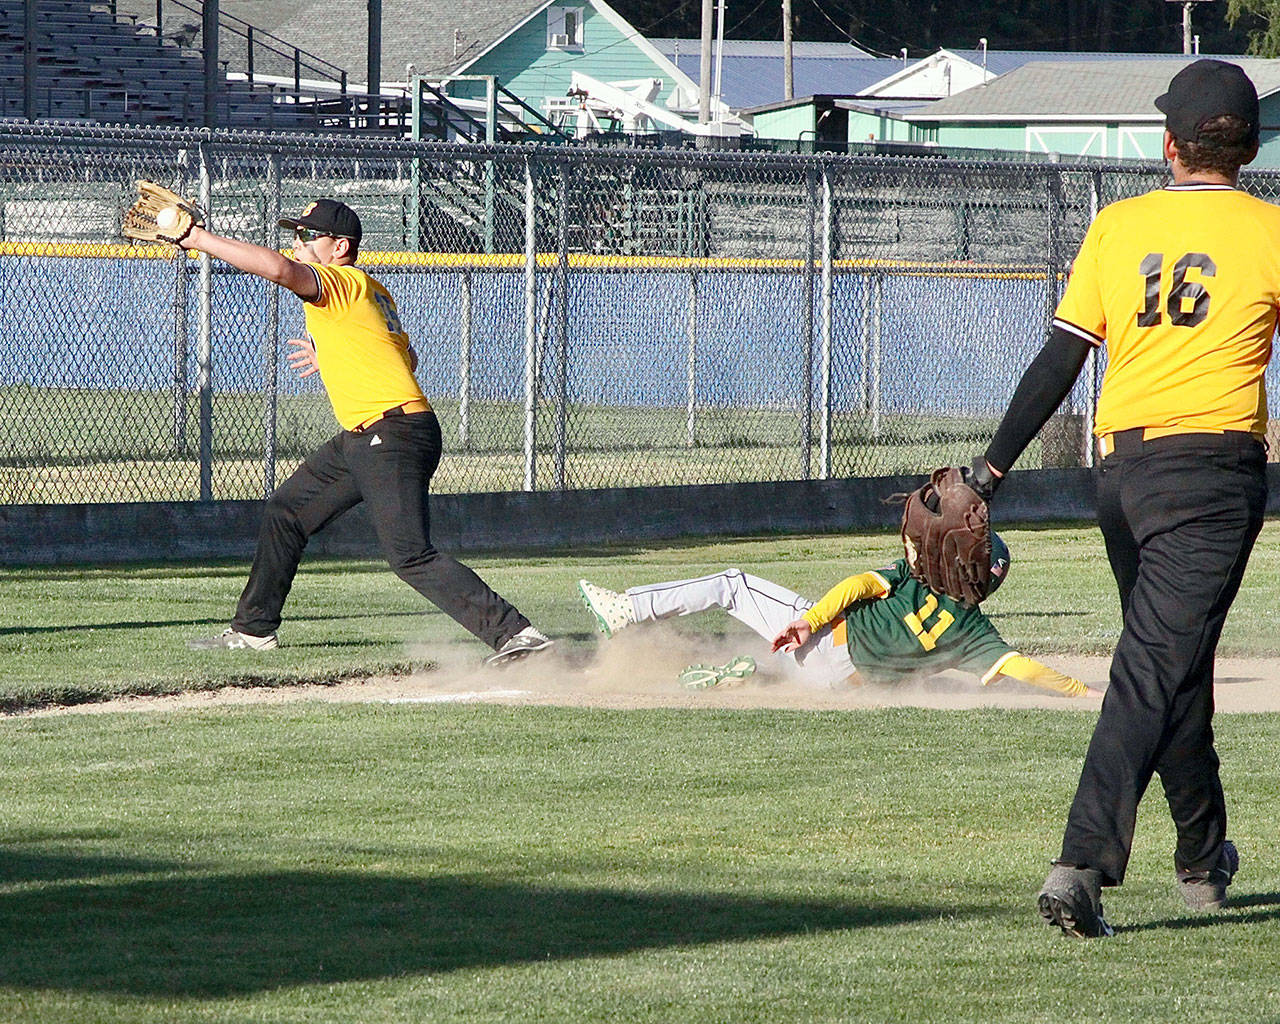 No. 11 Sean Lyman of the Laurel Lanes team slides safely into third base on a wild pitch from #16 Kaleb Mullen the pitcher. The third baseman for Elks is Joseph Ritchie taking the throw.